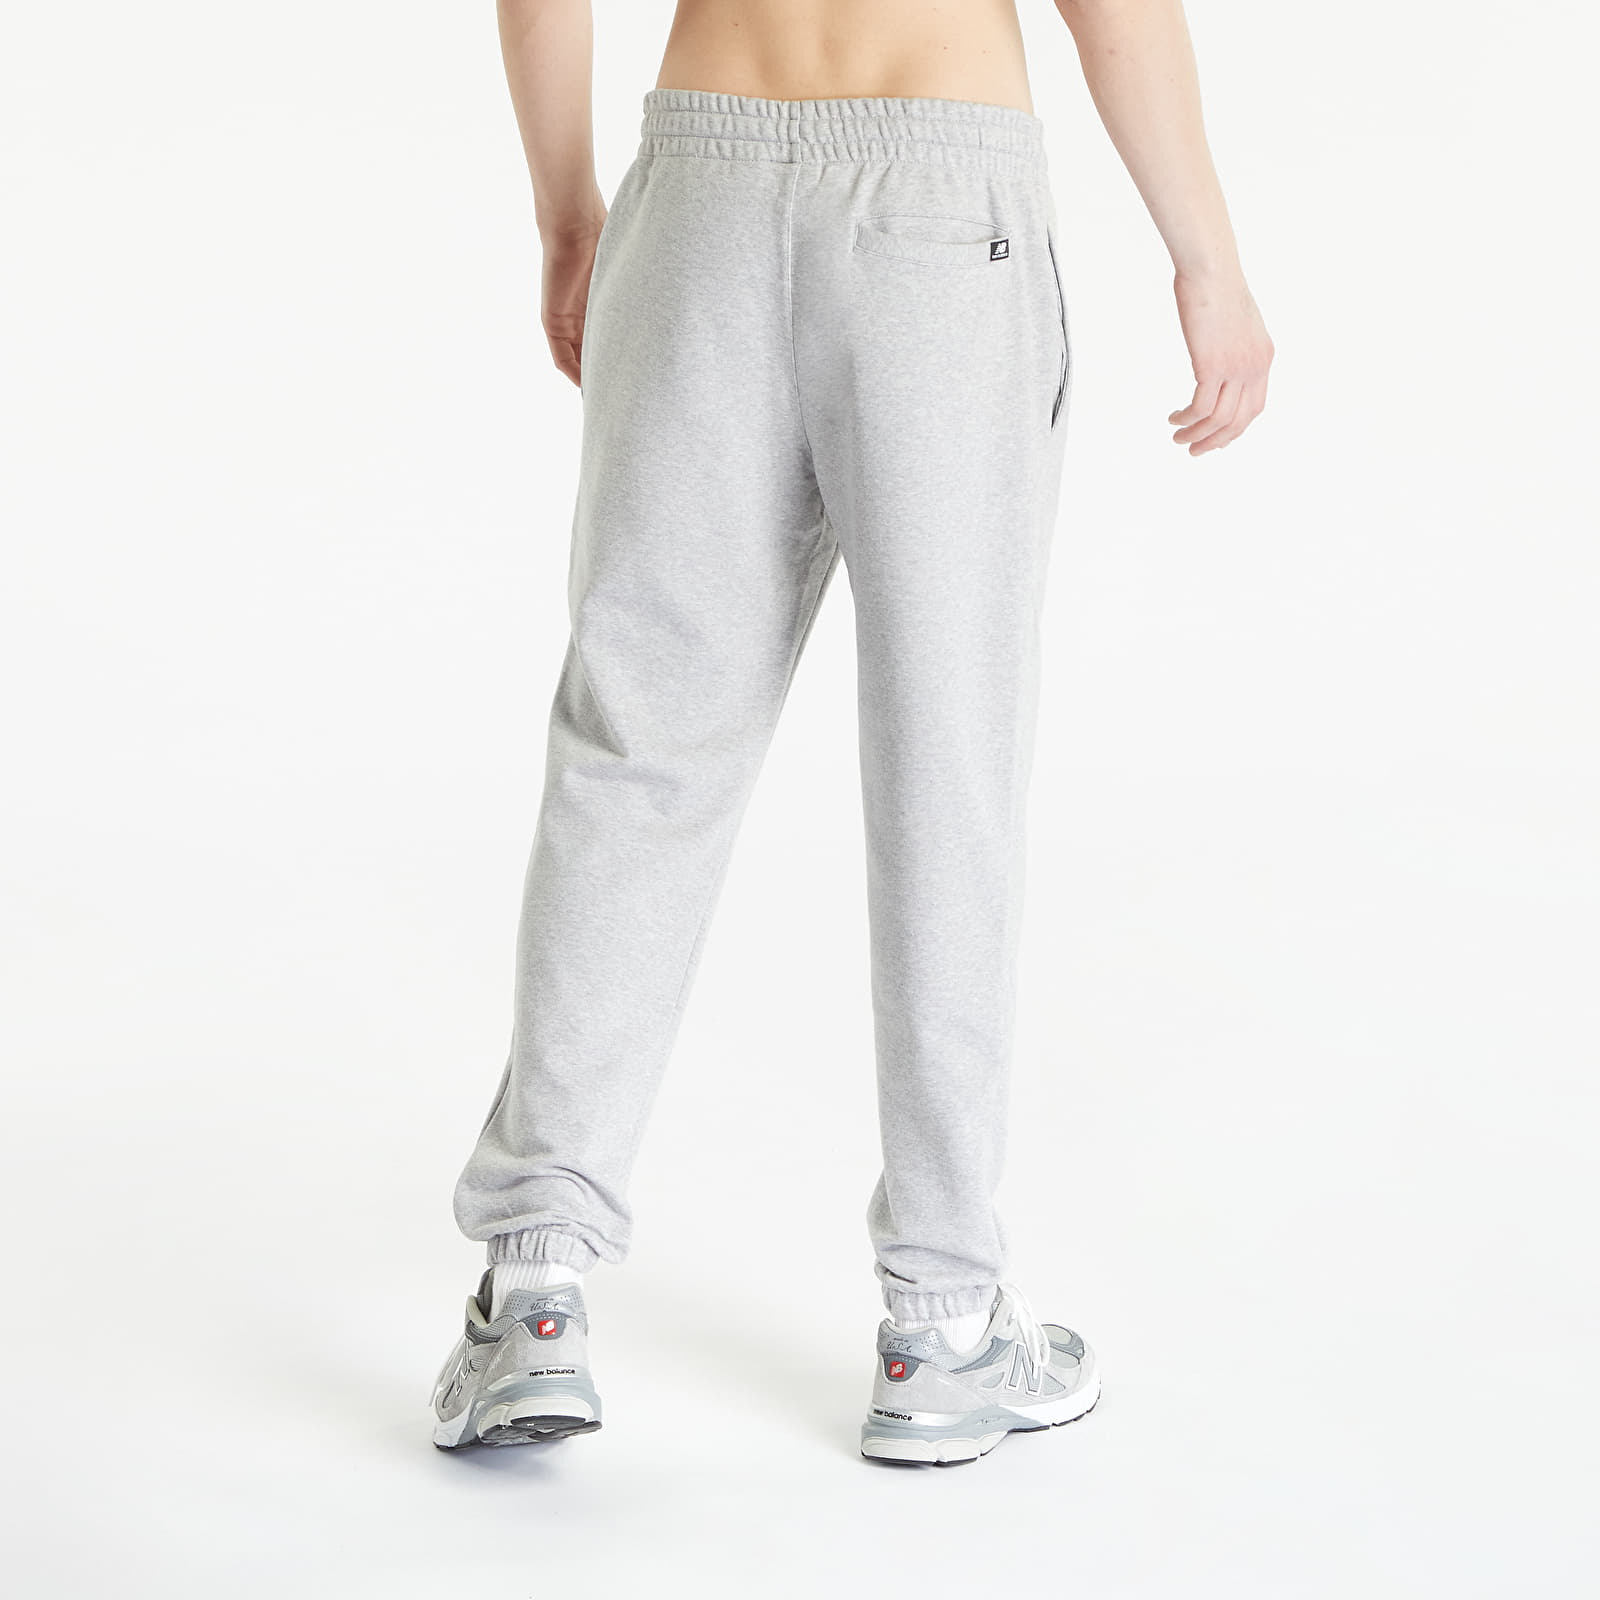 Metallic French Terry Sweatpants With Pockets / Choose Regular or Petite /  Joggers / Sparkle / Heathered Gray Silver / Heathered Taupe Gold 